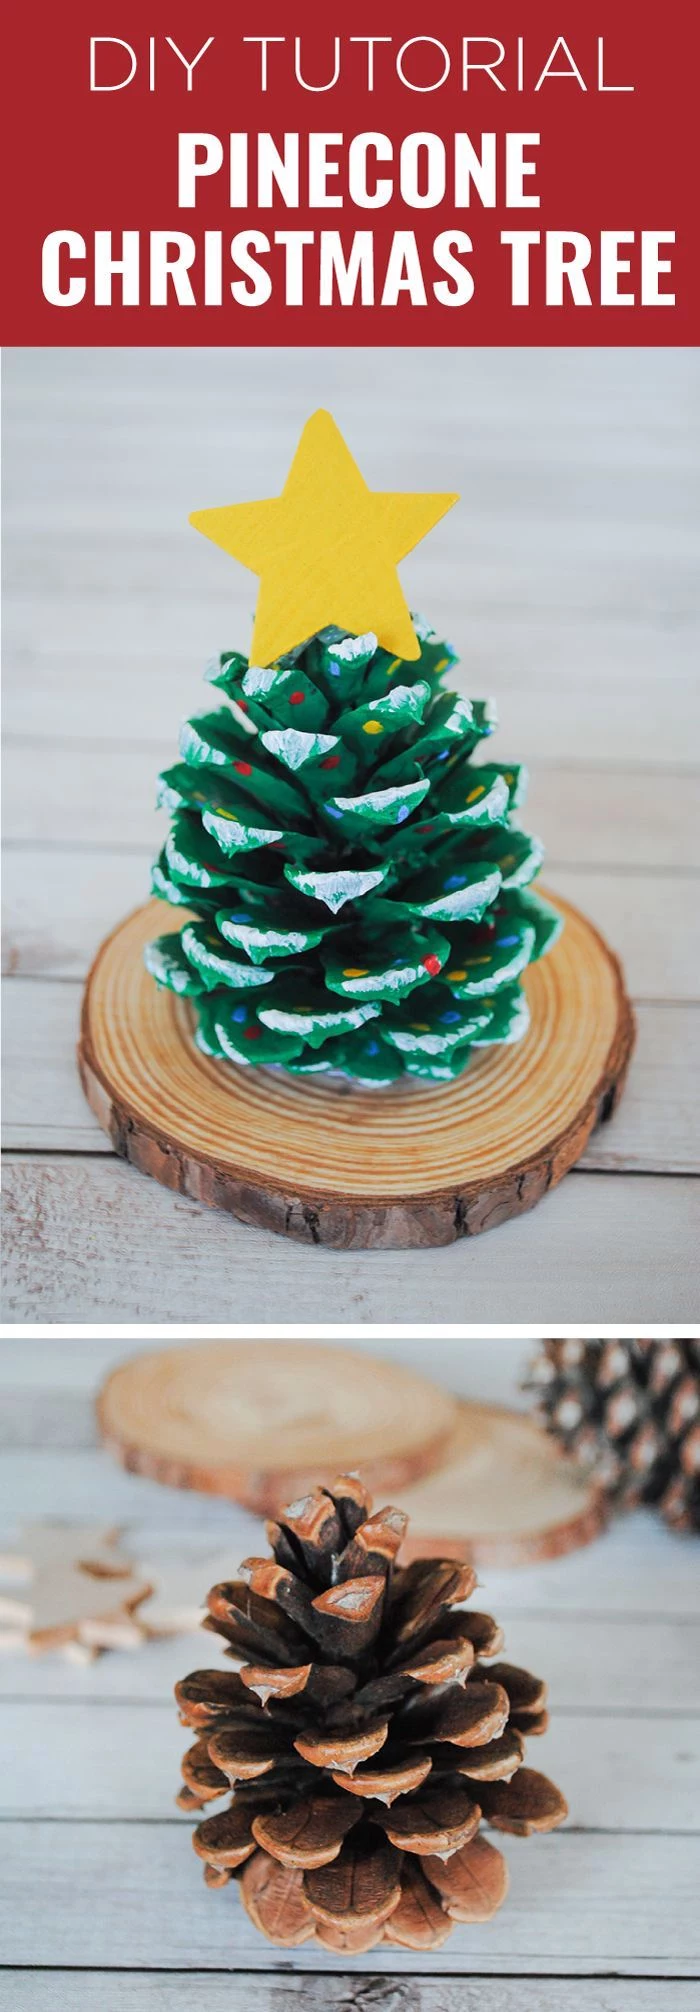 pinecone christmas tree, step by step diy tutorial, christmas arts and crafts, pinecone painted in green, placed on wooden log